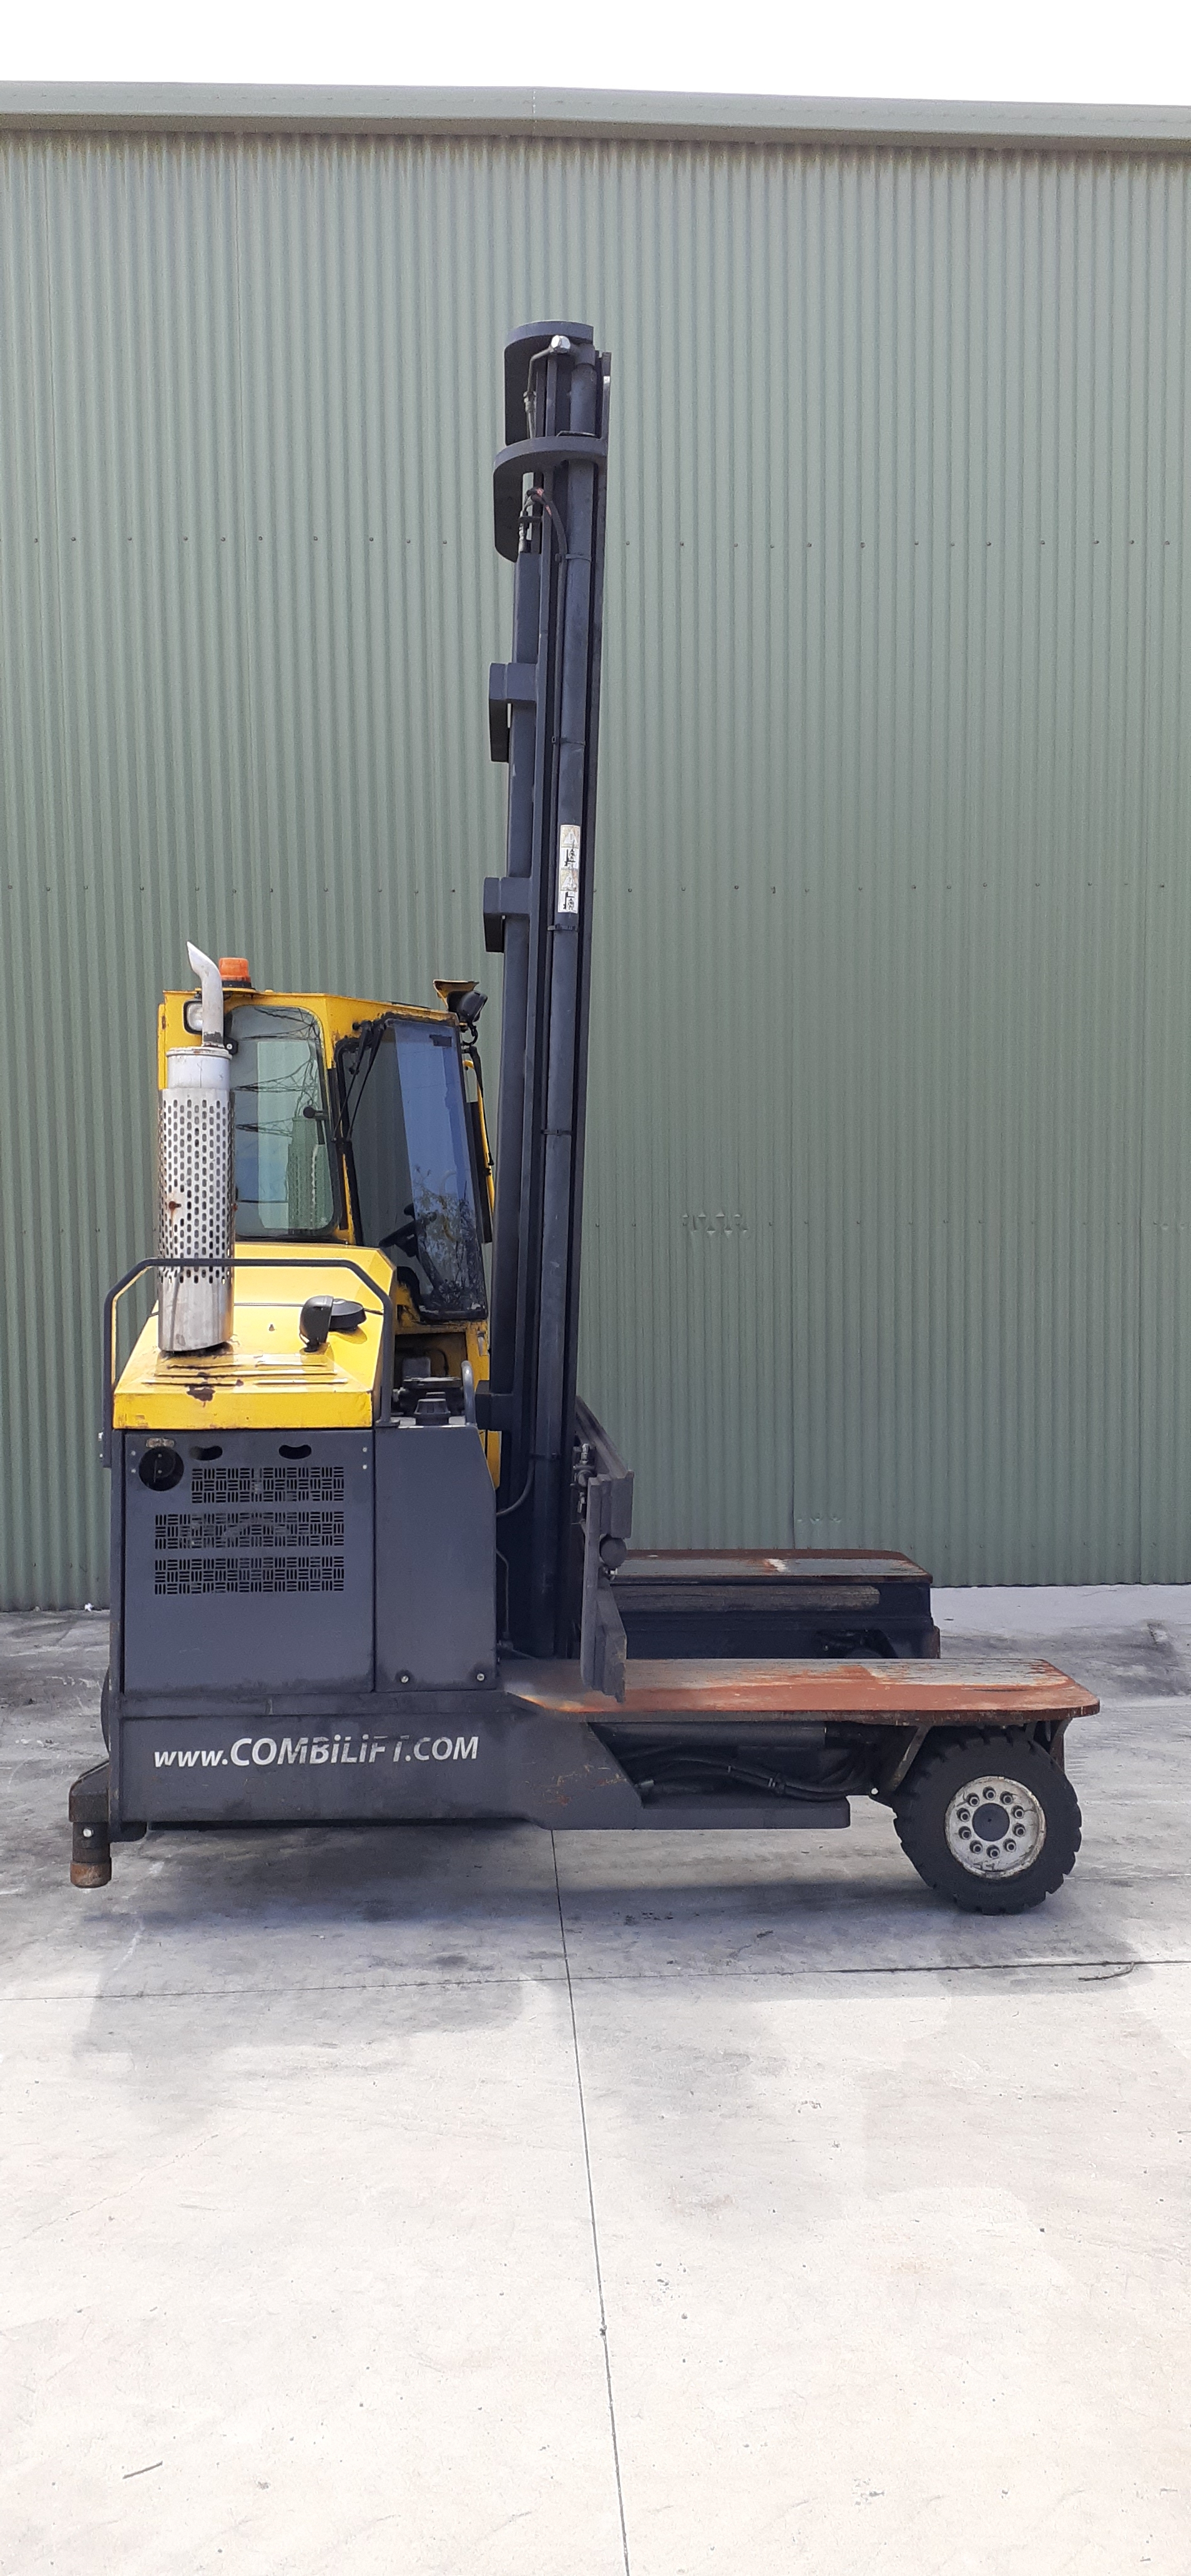 Used forklift: COMBILIFT C4800 